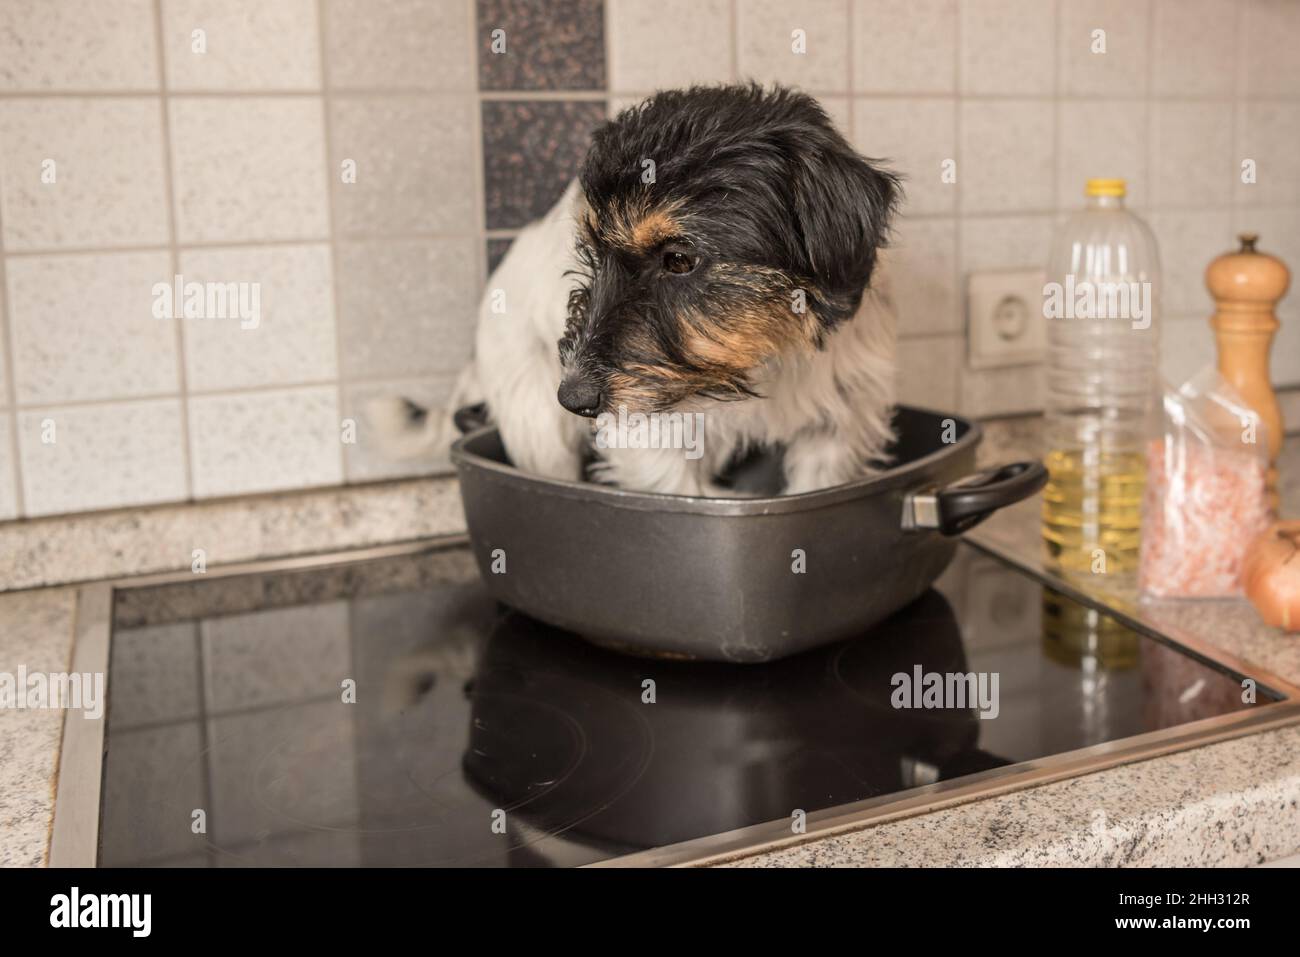 Little Cheeky cute Jack Russell terrier dog sits in a frying pan. A hot dog so to speak. Stock Photo